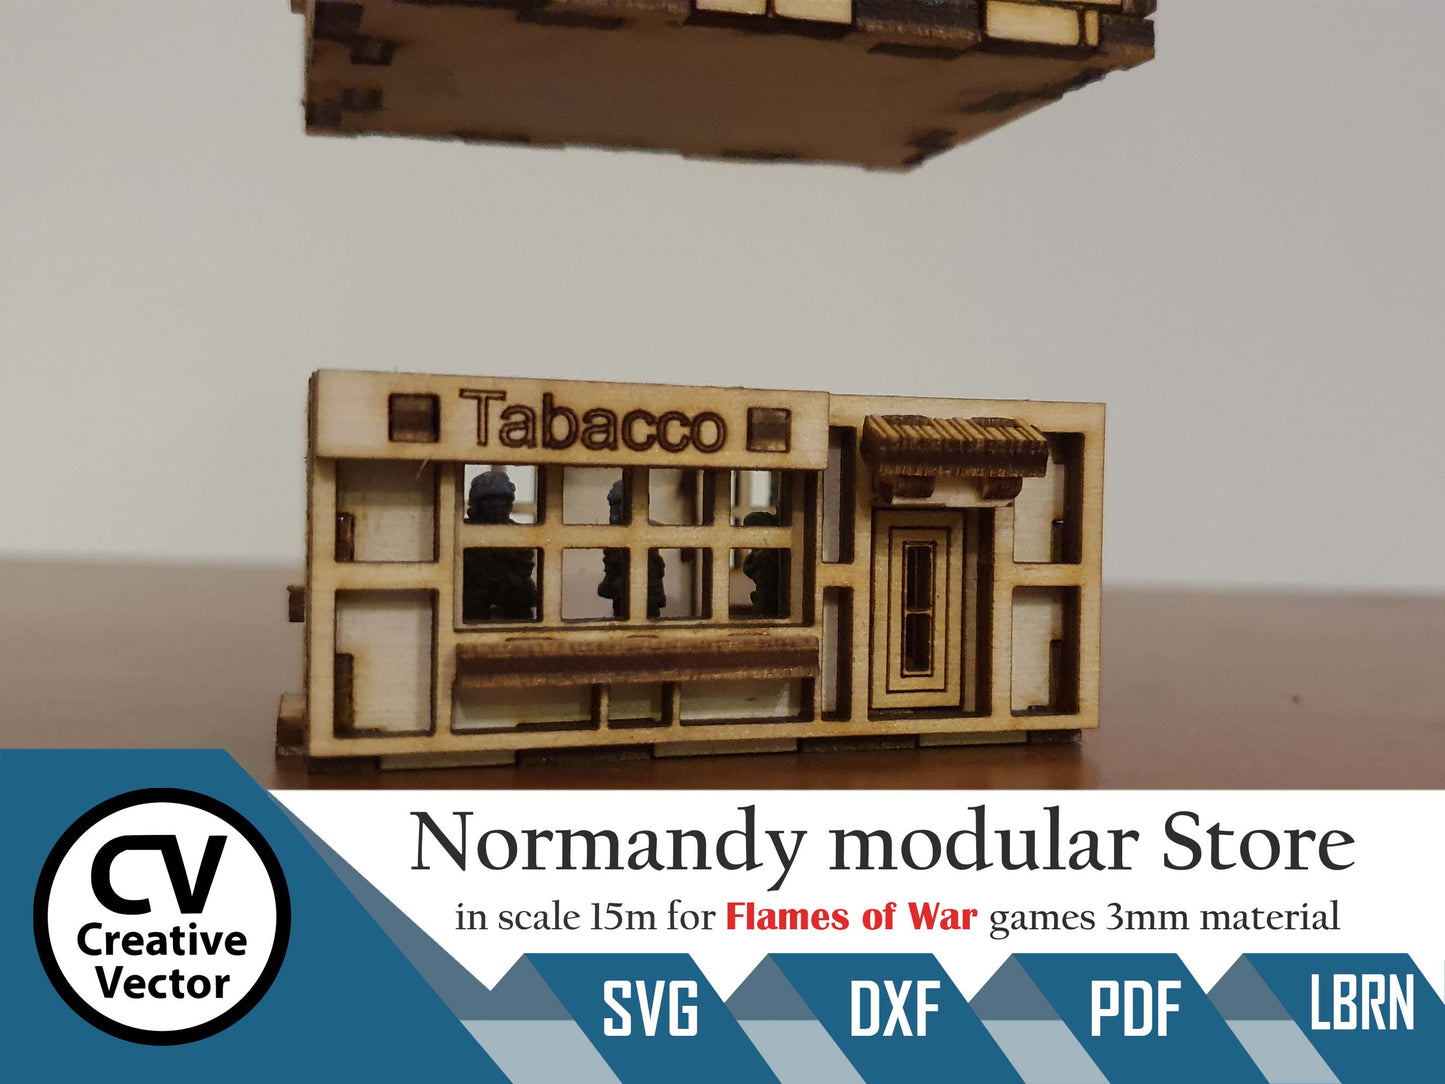 Normandy modular Store in scale 15mm (1:100 / 1:87 / H0) for game Flames of War